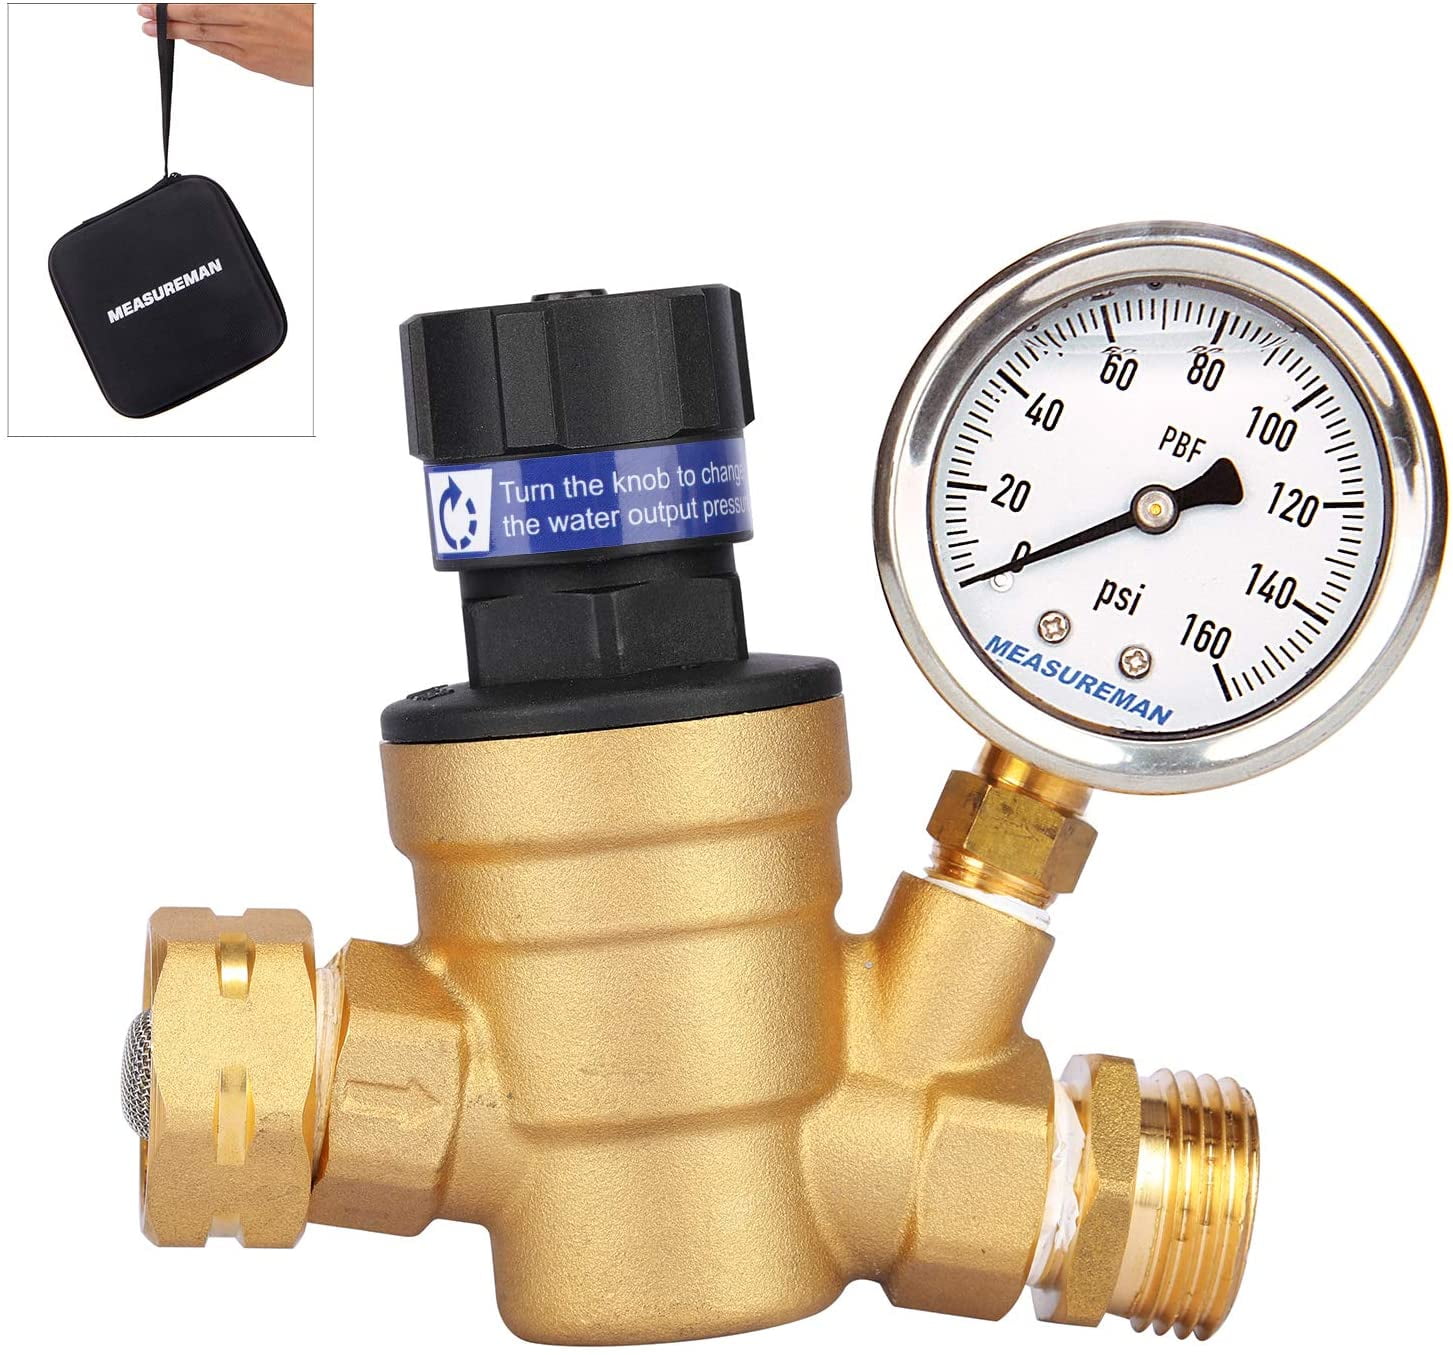 Water Pressure Regulator 3/4’’ GHT Handle Adjustable Brass Lead-Free RV Pressure Reducing Valve with Gauge 160PSI and 2 Inlet Screened Filters for RV Camper Travel Trailer Garden 